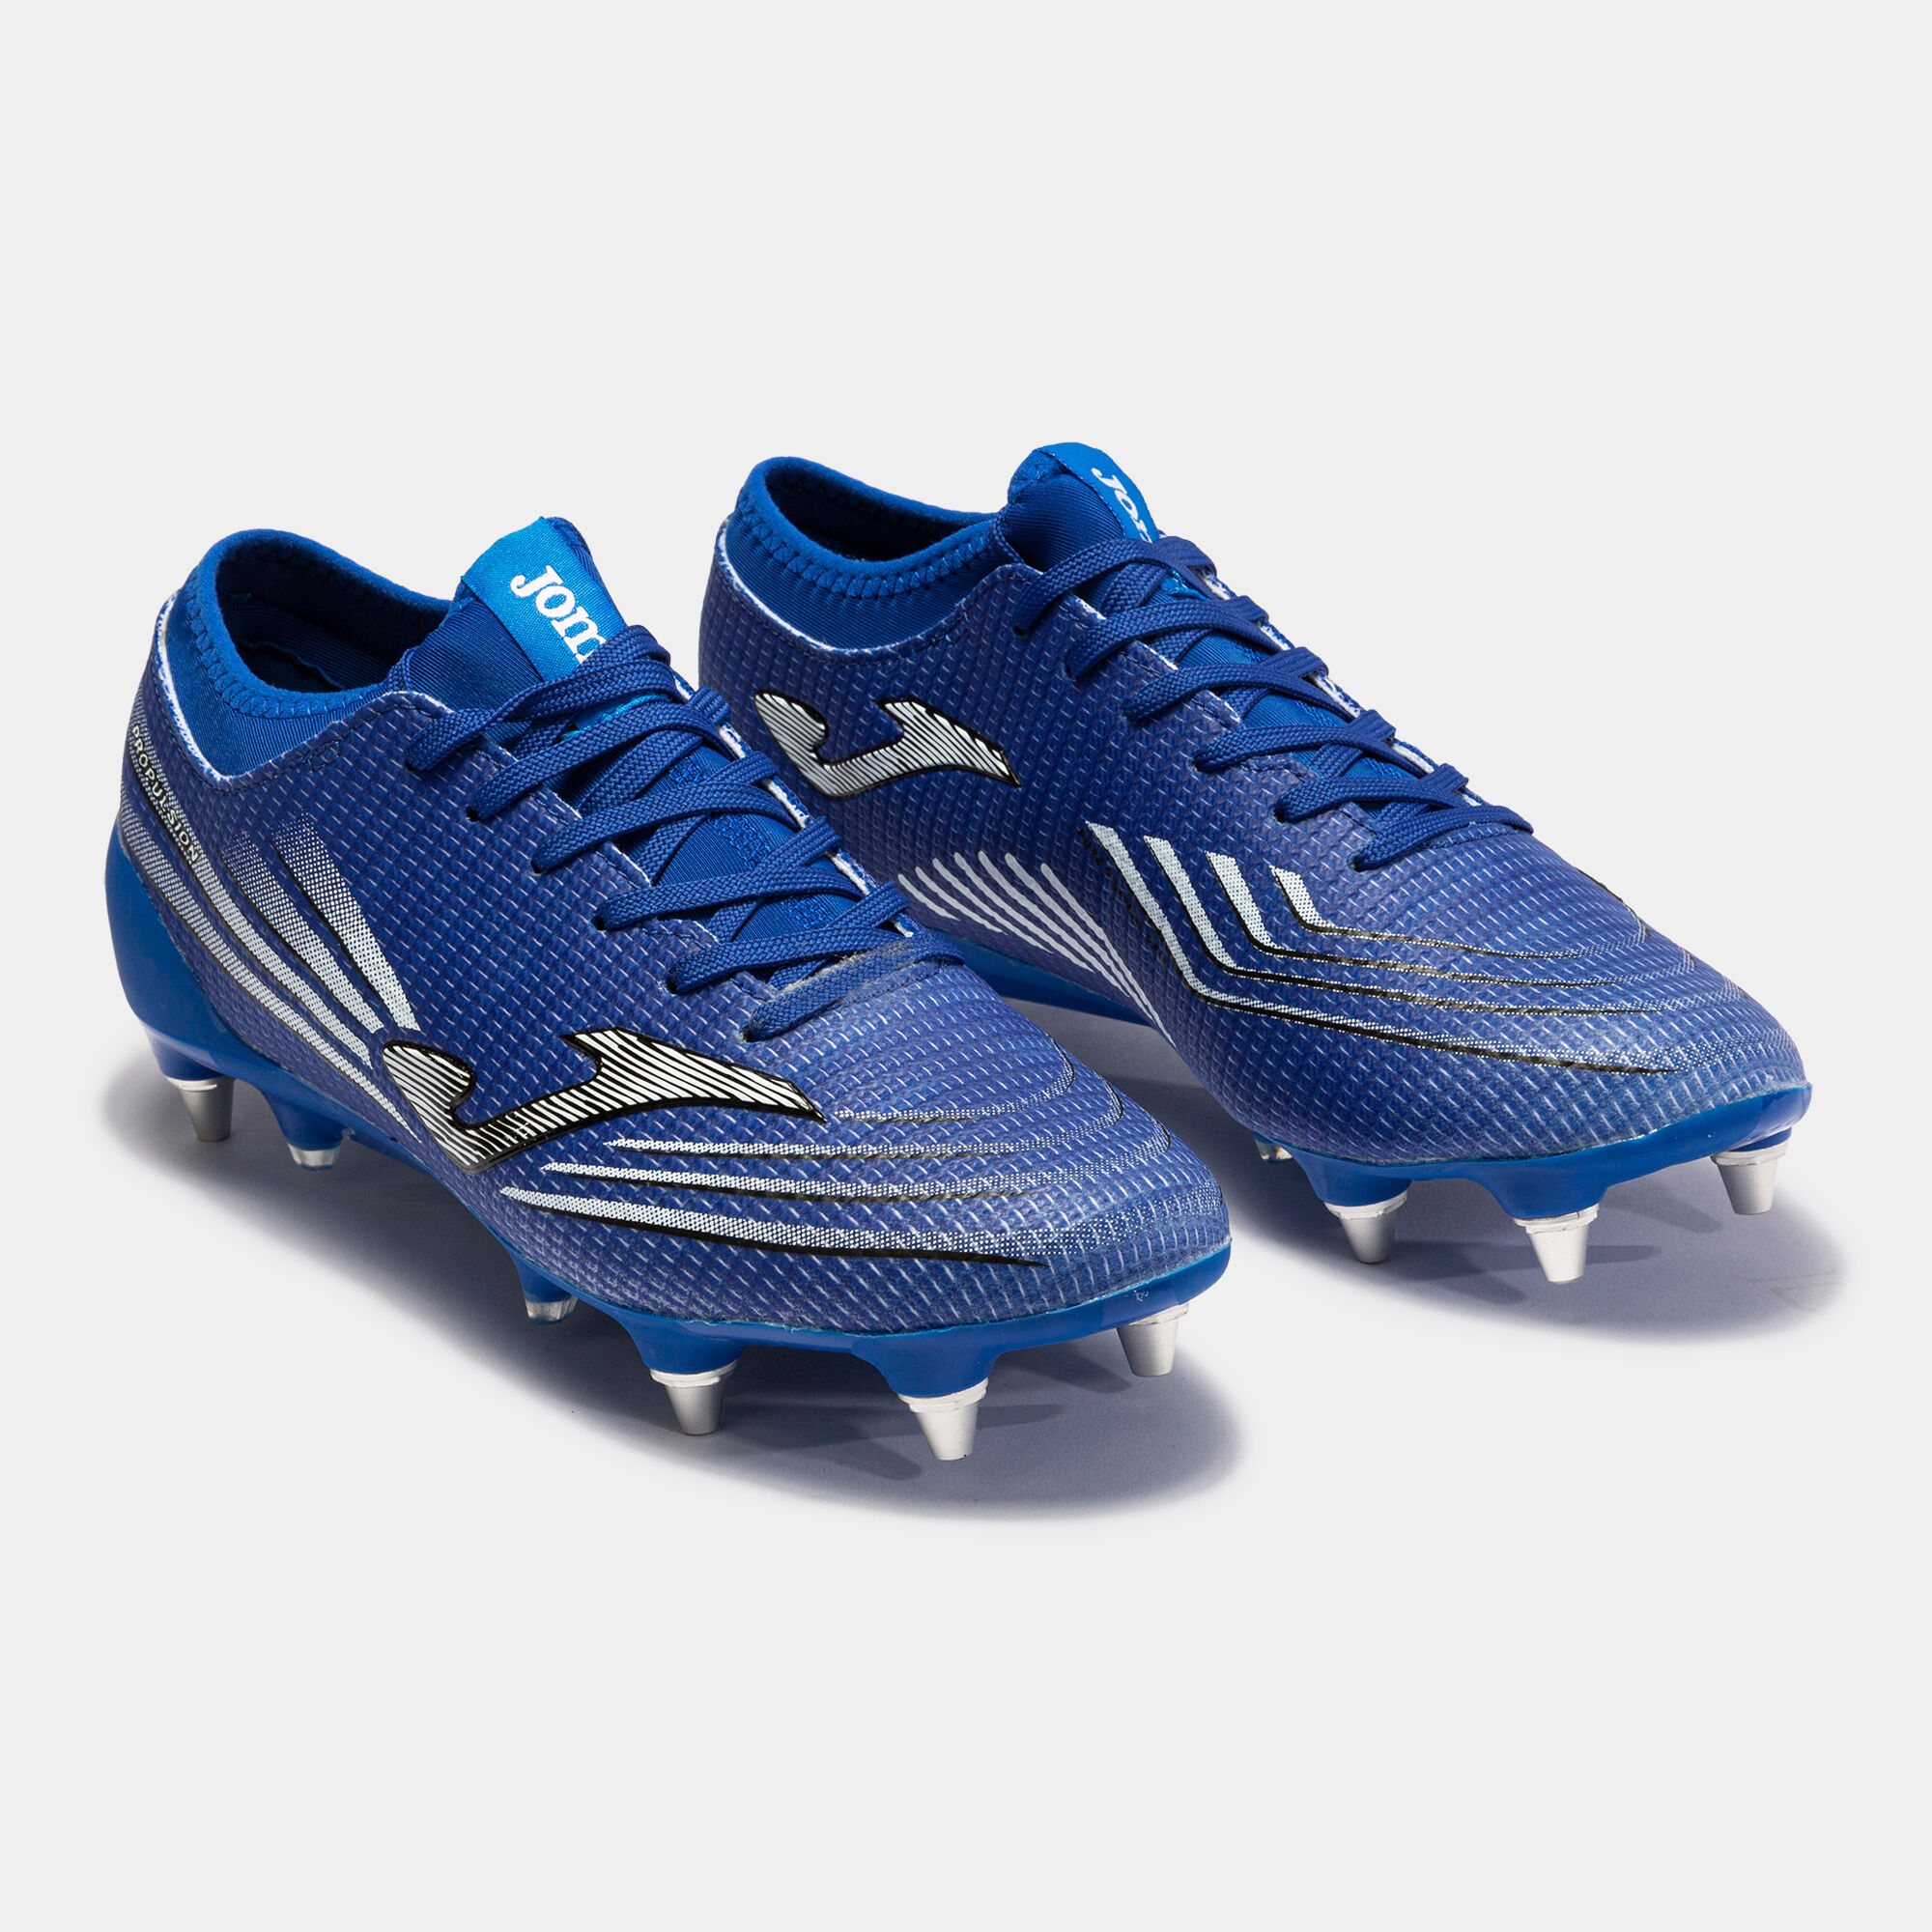 Football boots Propulsion Lite 21 soft ground royal blue